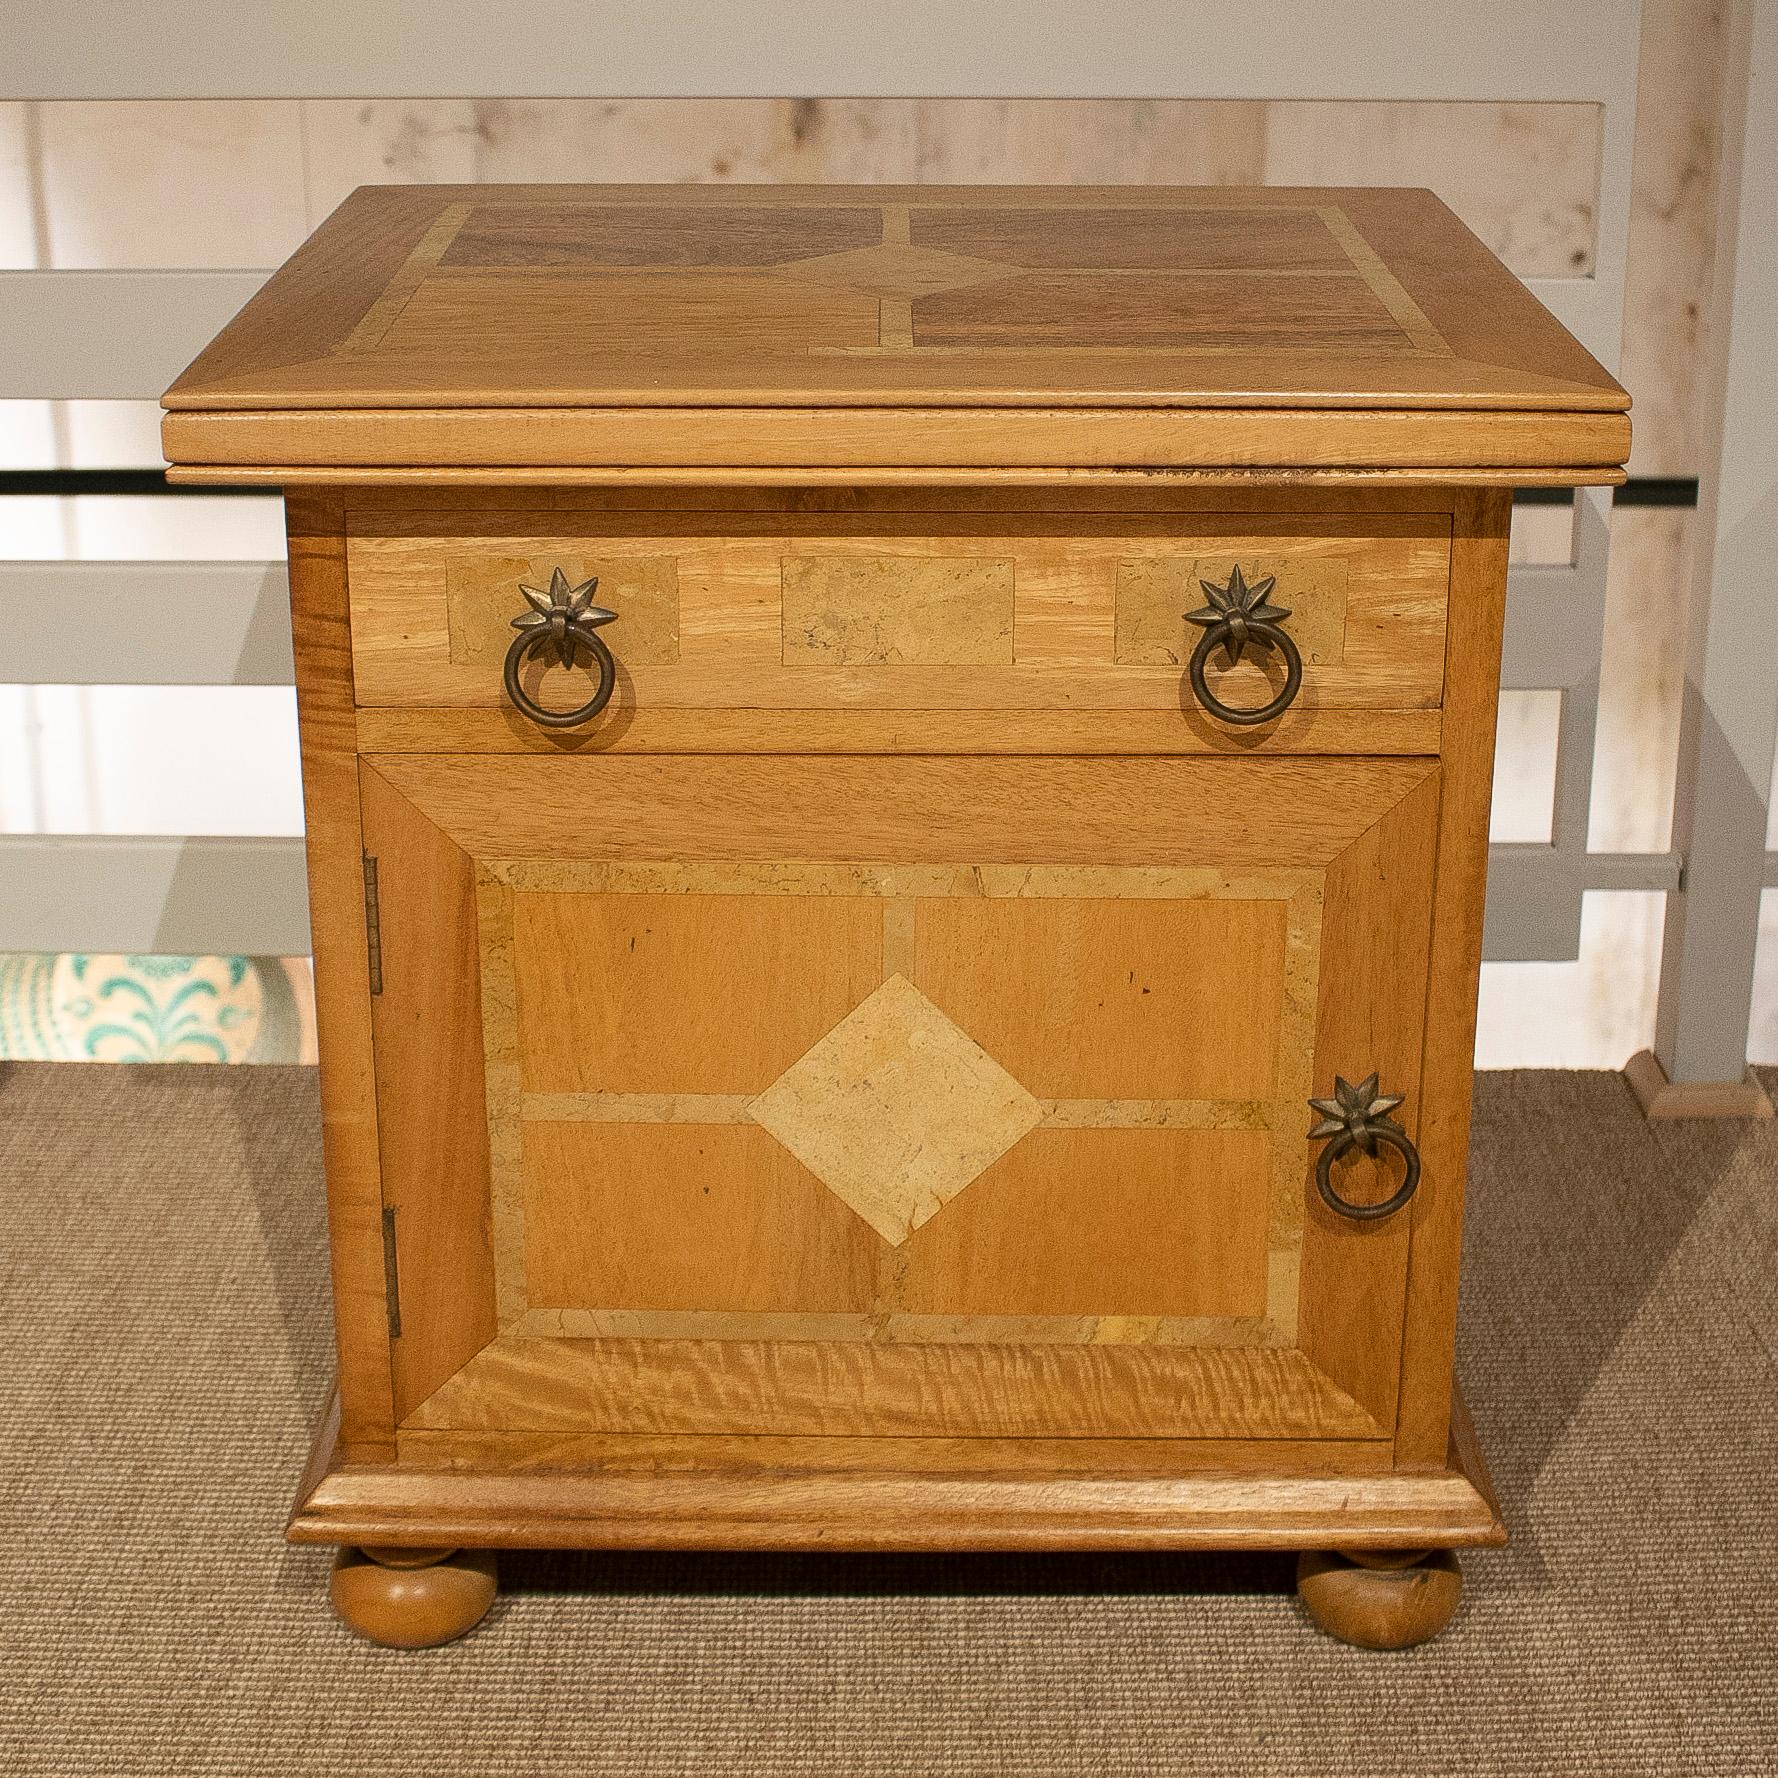 1980s French 1-drawer and 1-door side table hand crafted using two types of wood.